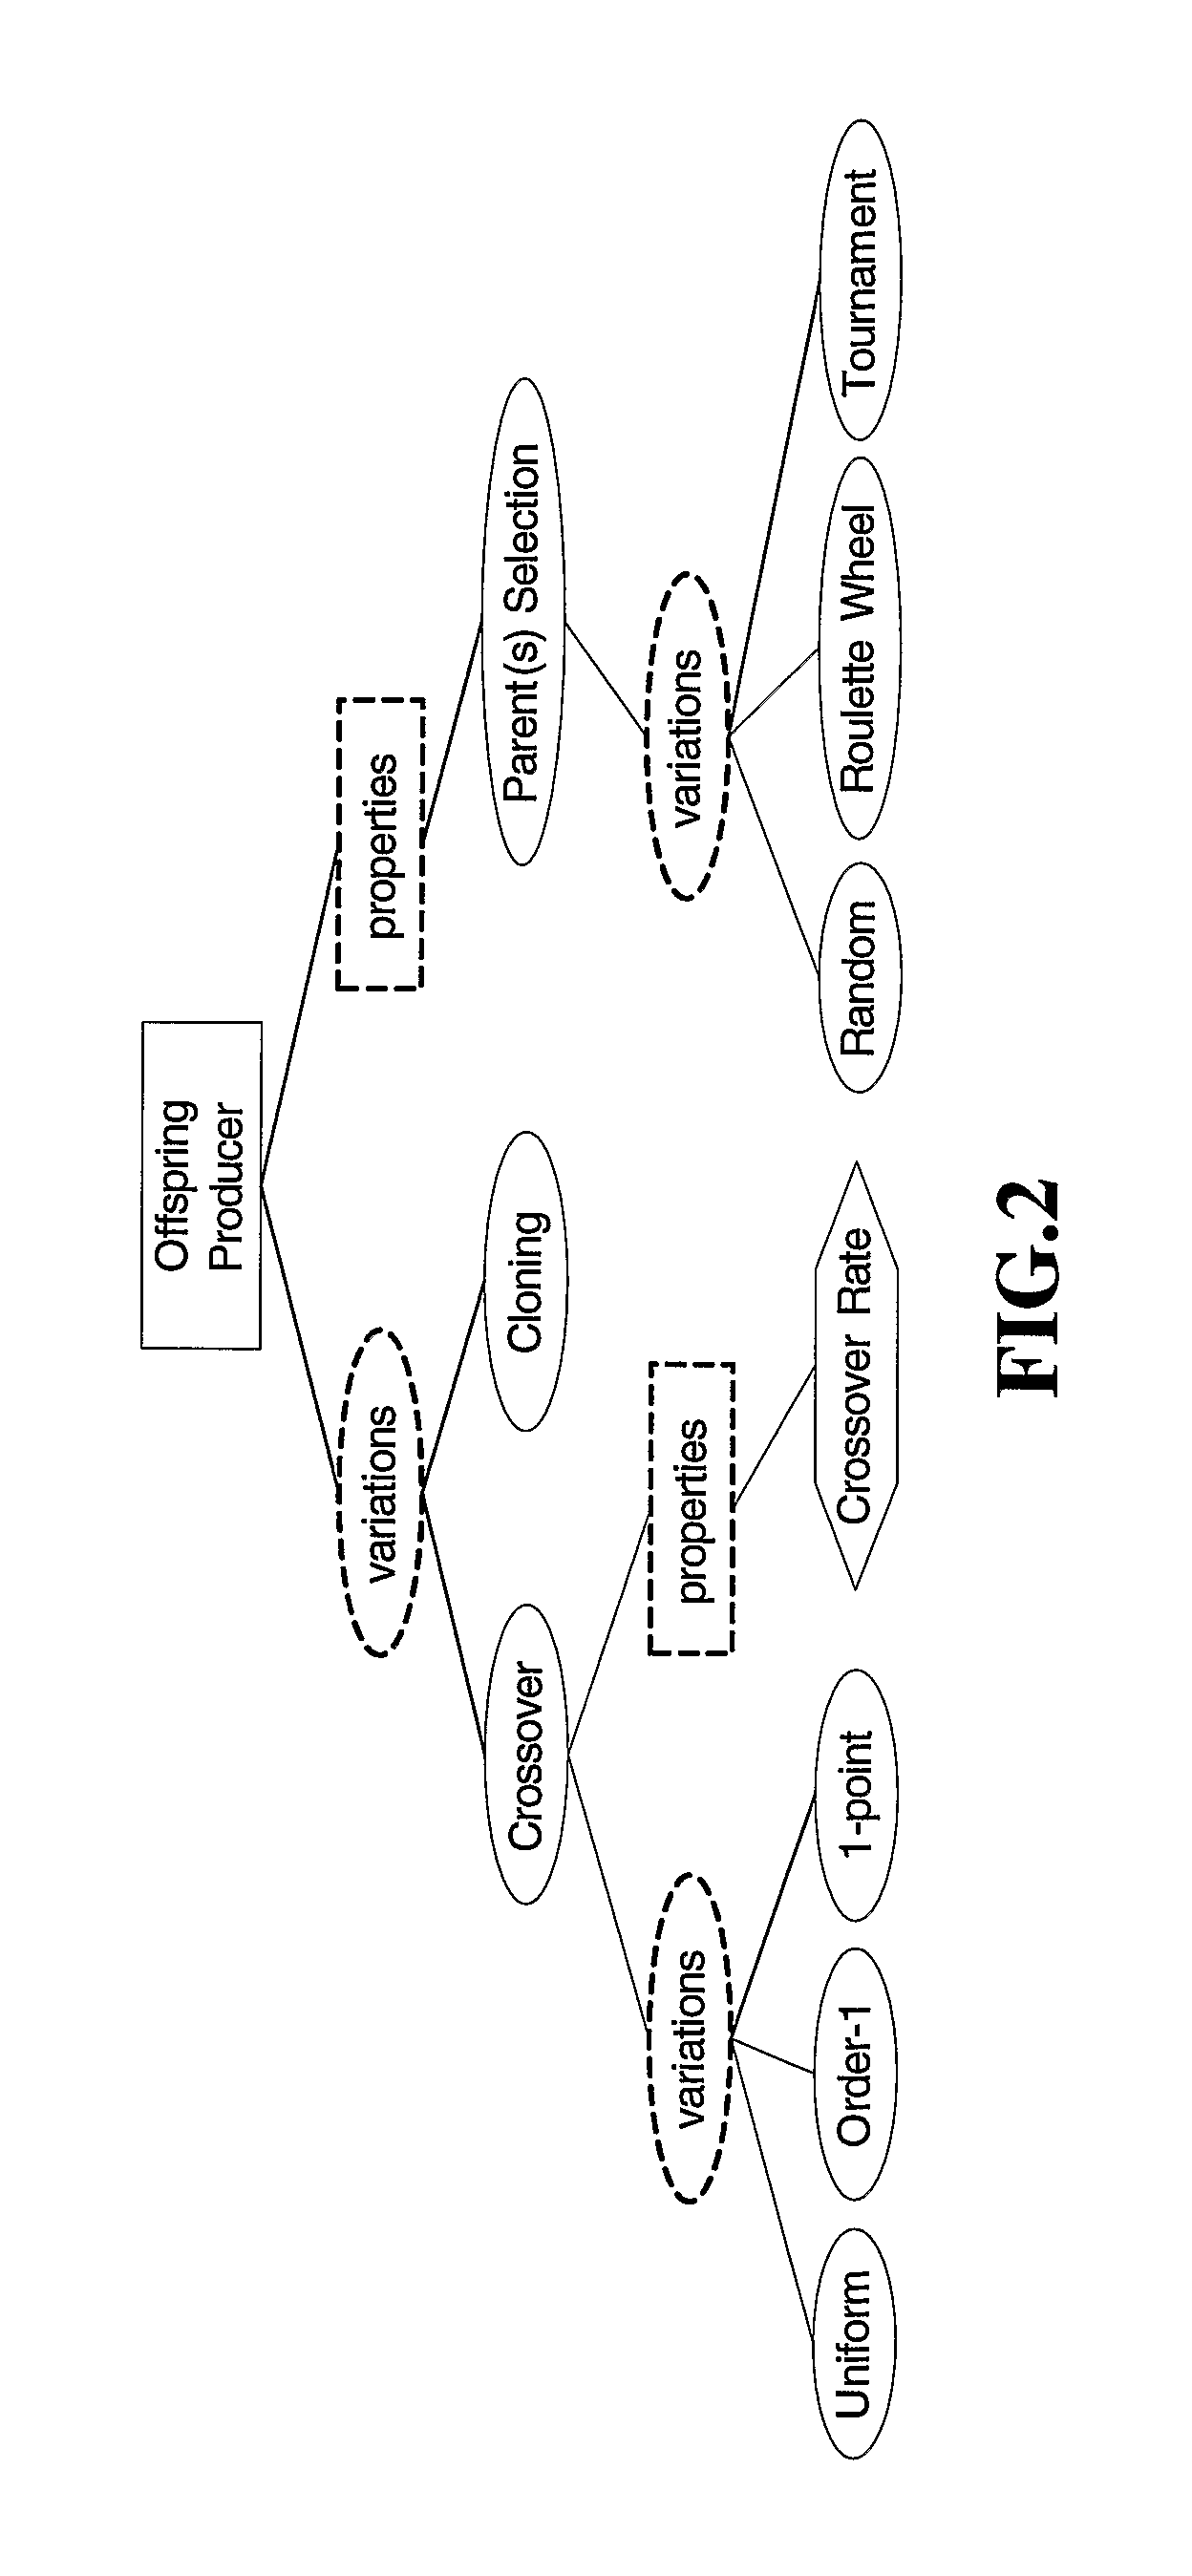 Method and apparatus for automatic configuration of meta-heuristic algorithms in a problem solving environment